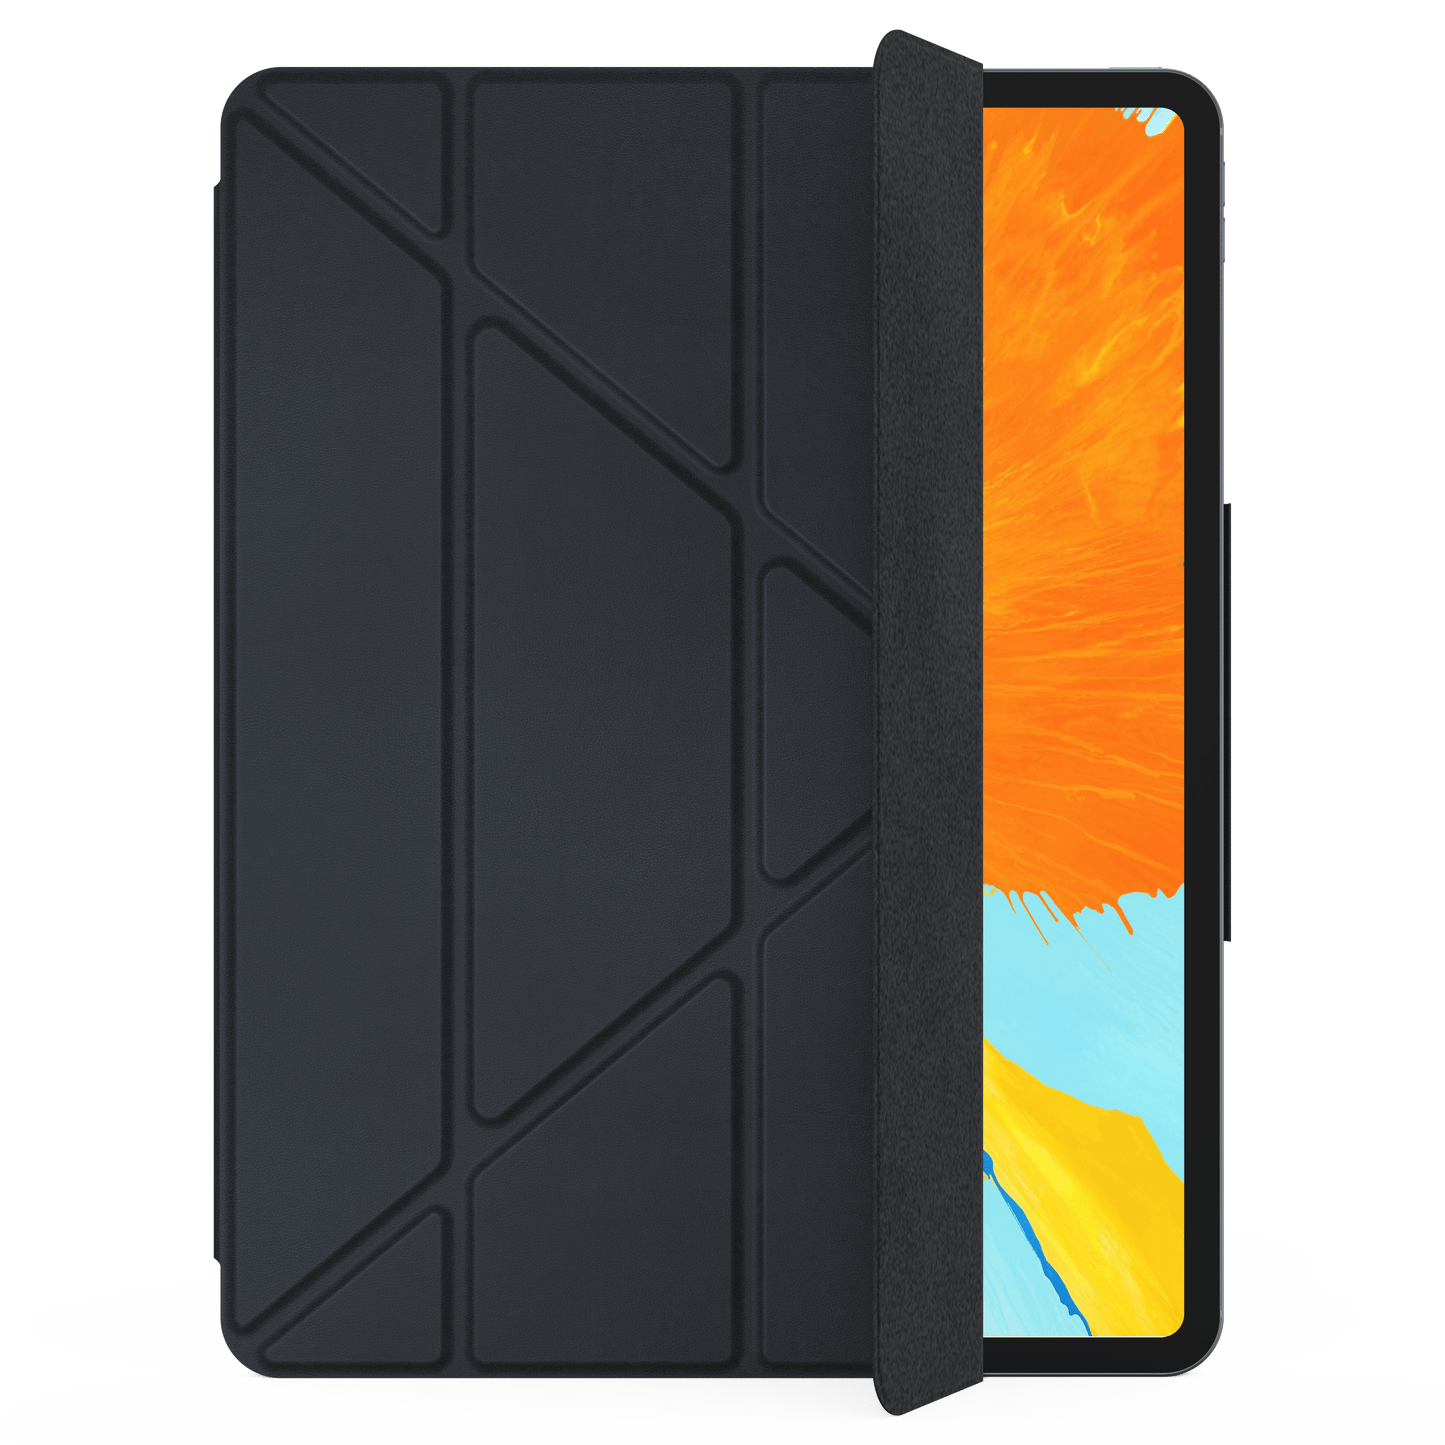 MoArmouz - Magnetic Origami Smart Cover for iPad Pro 11-inch, 1st Gen (2018)